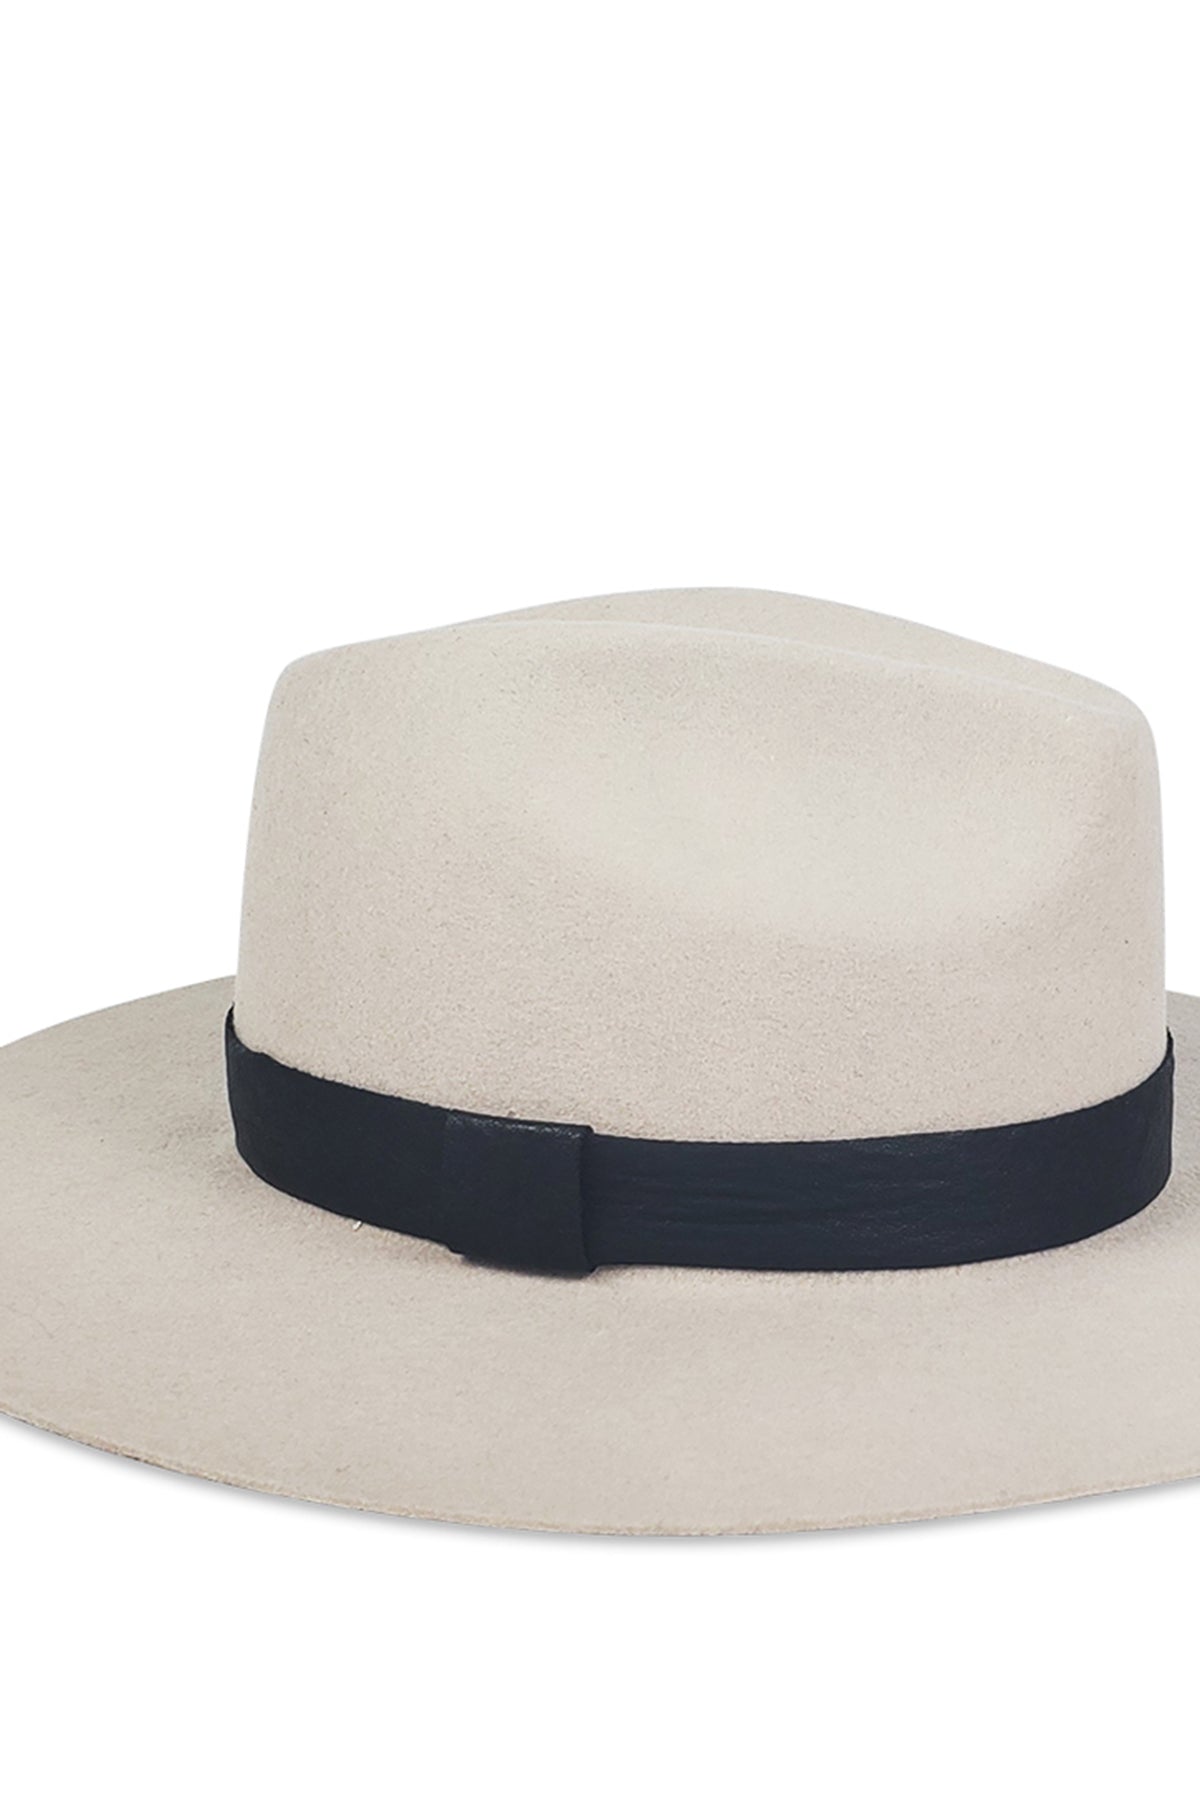 A timeless LUXE AVA FEDORA hat with a black band by Velvet by Graham & Spencer.-8031441125457